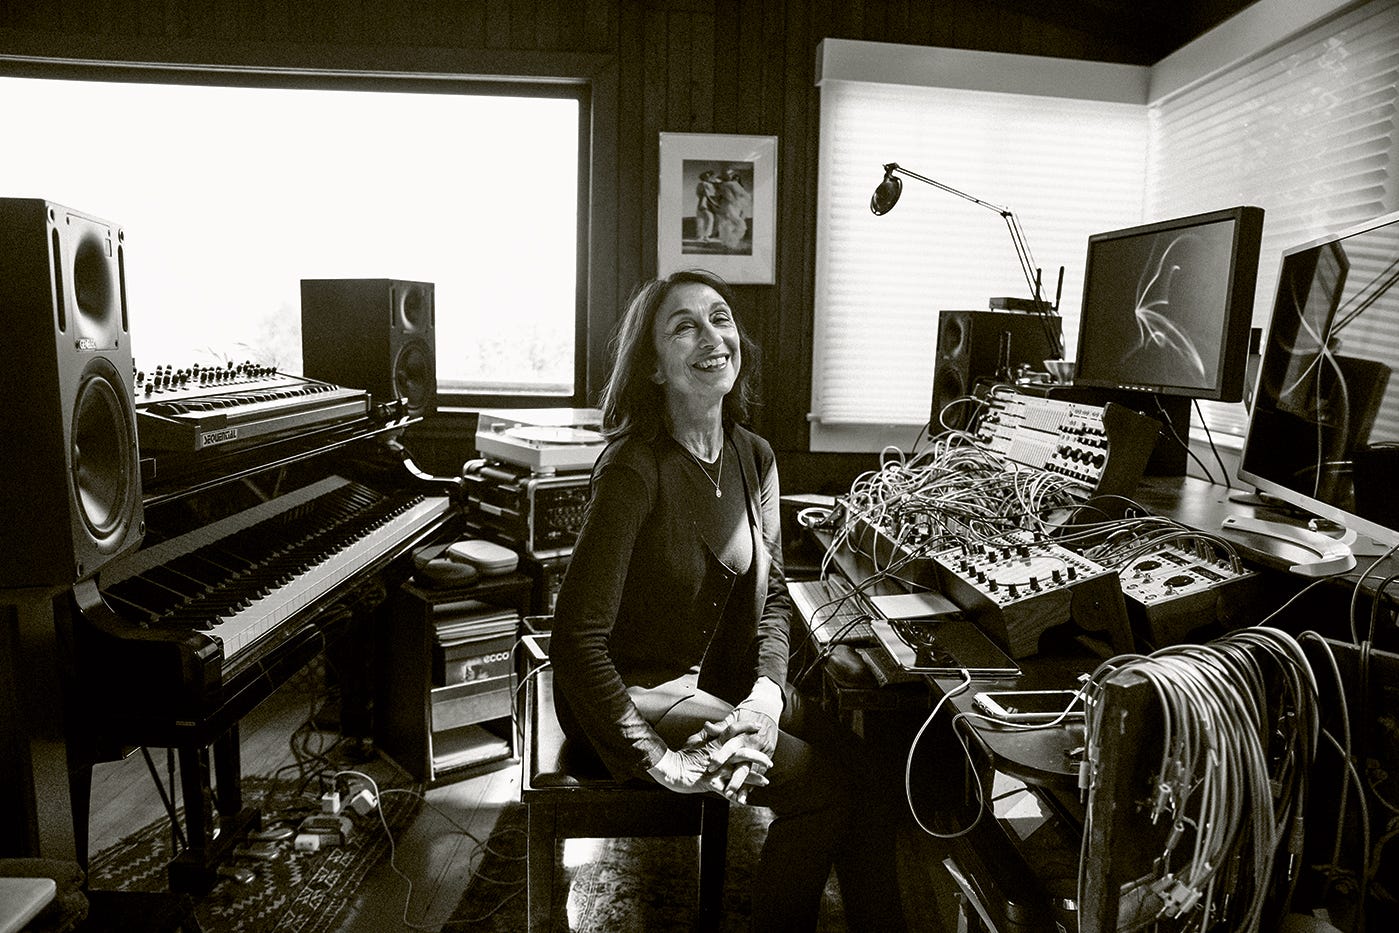 Suzanne Ciani poses in black and white at her music workstation, surrounded by a piano and a modular synthesizer.